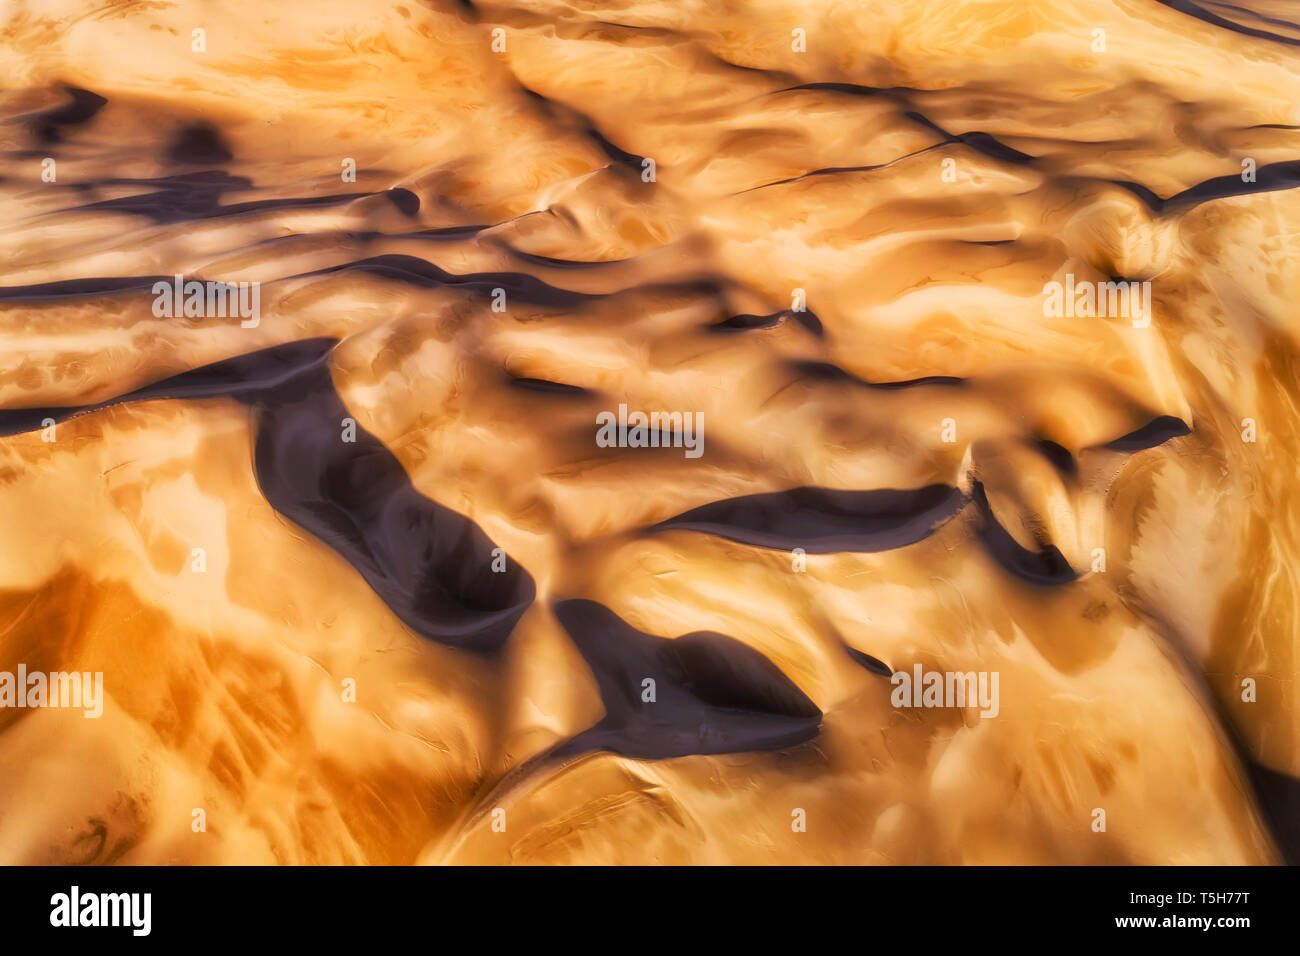 Folds of sand dunes seen from above top down in soft morning sun light highlighting surface of remote intanct lifeless desert land. Stock Photo